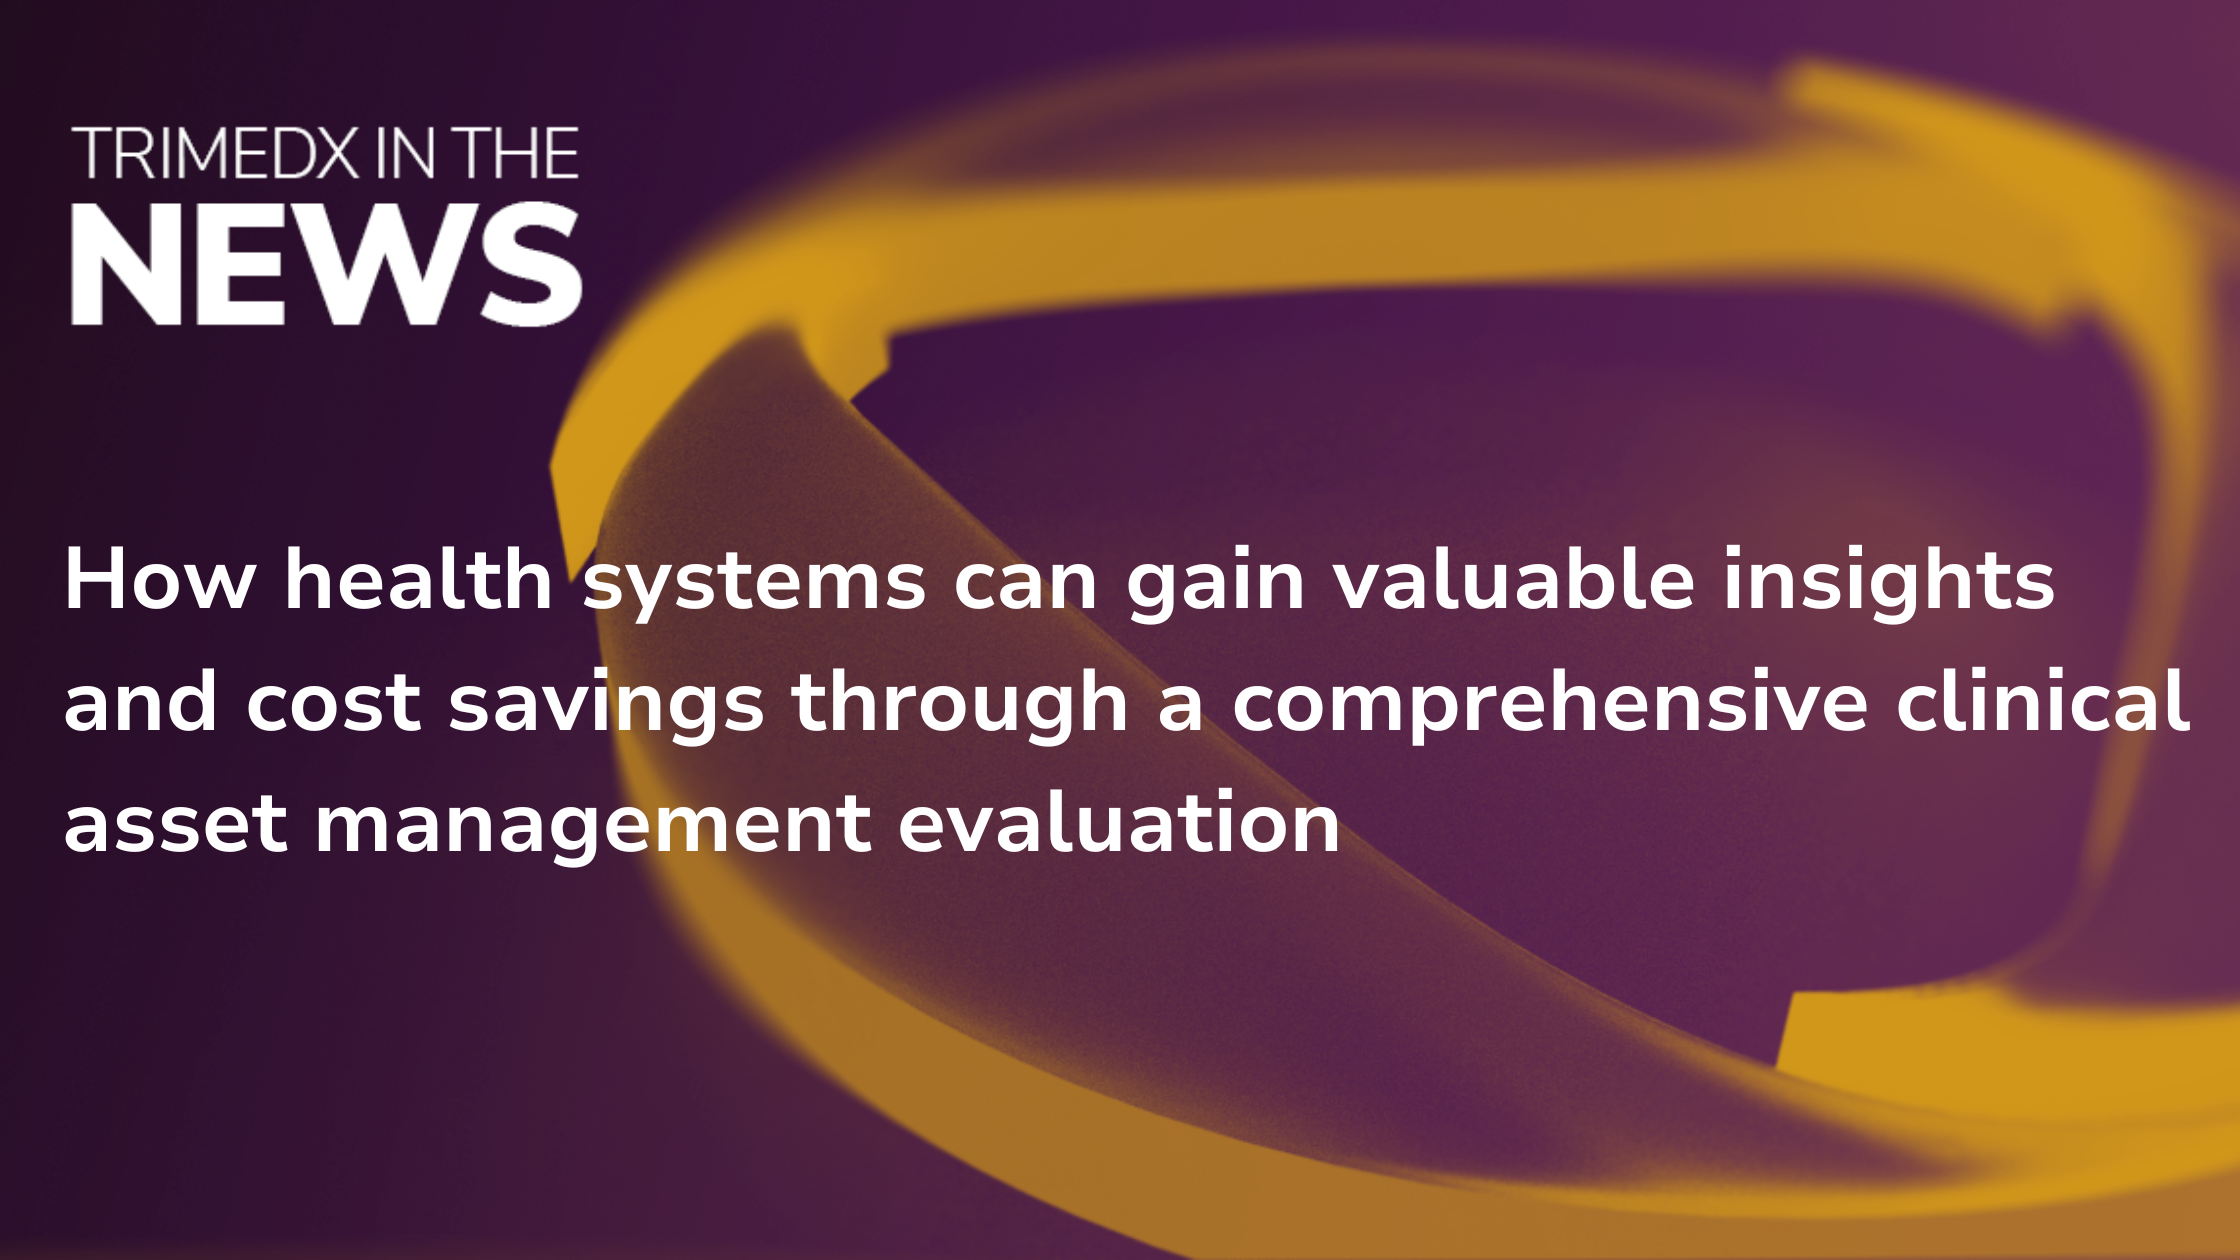 How health systems can gain valuable insights and cost savings through a comprehensive clinical asset management evaluation